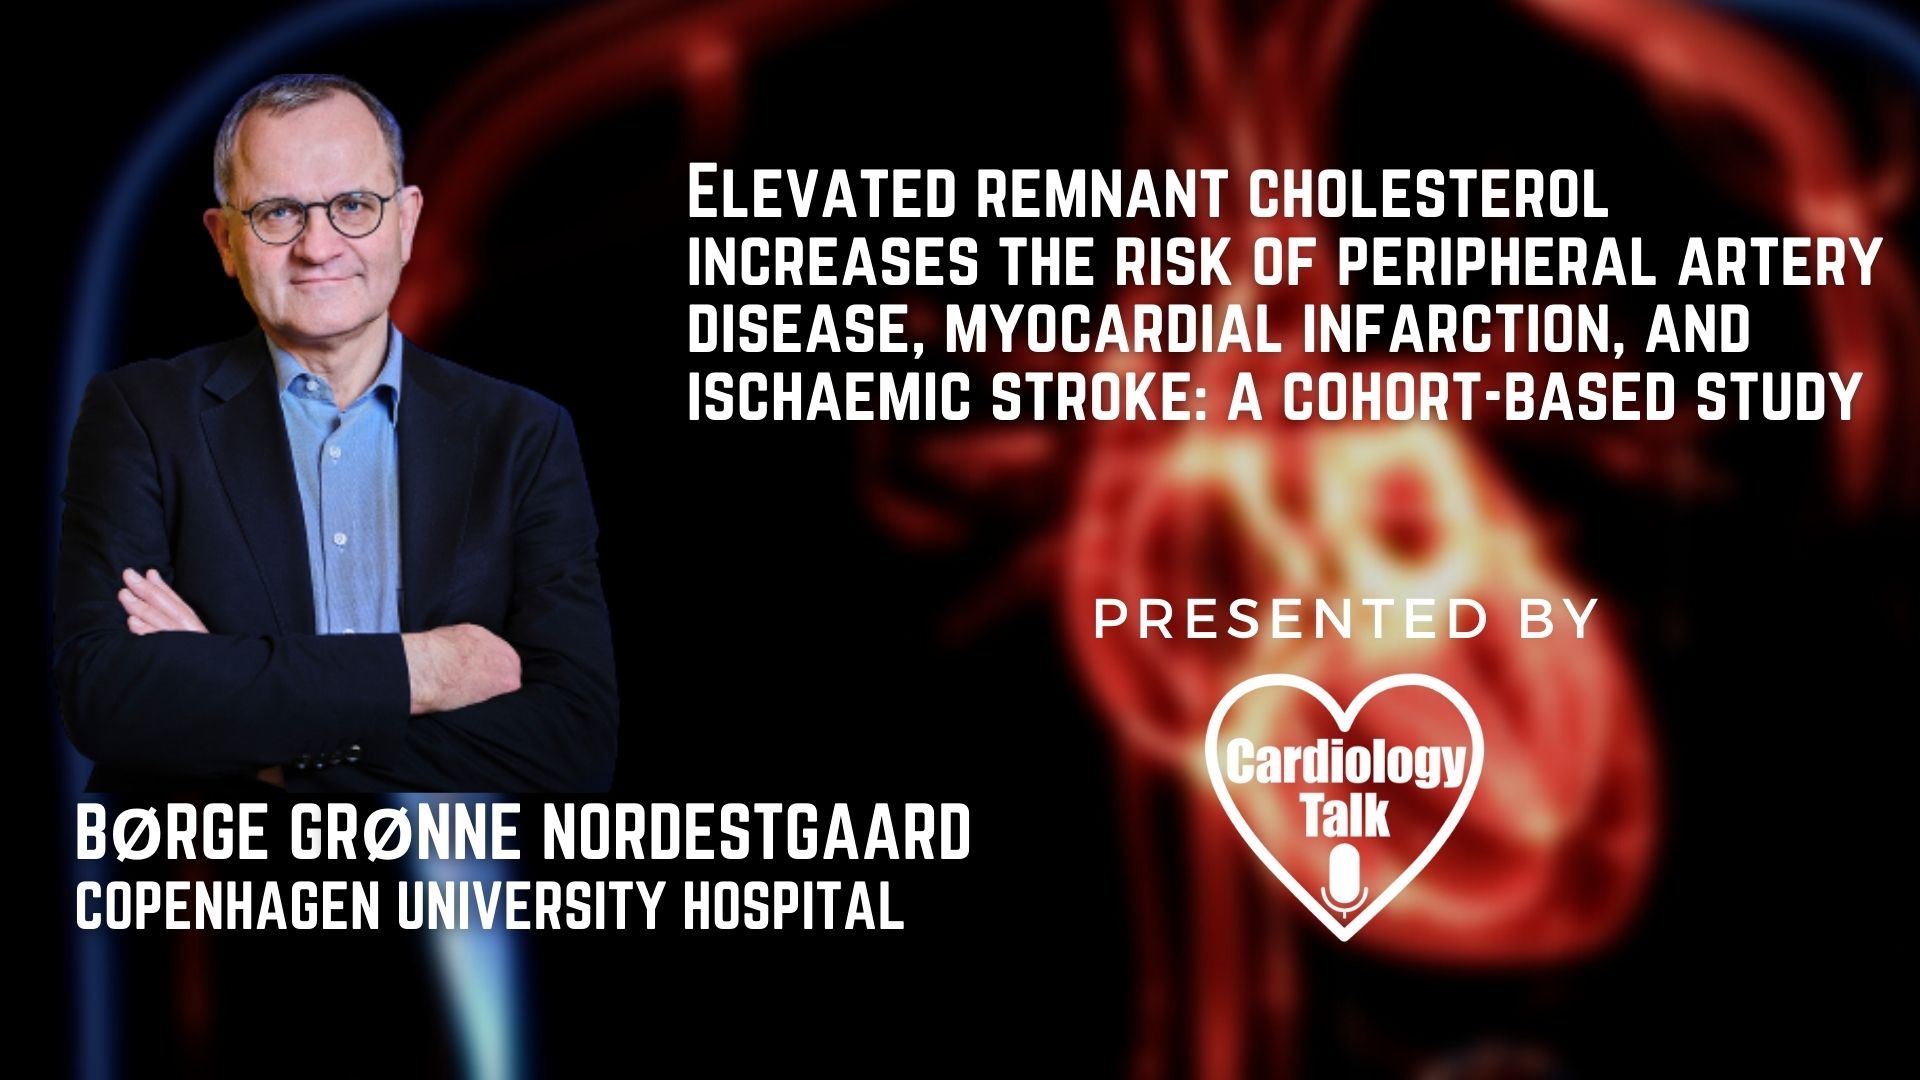 Børge Grønne Nordestgaard, MD- Elevated remnant cholesterol increases the risk of peripheral artery disease, myocardial infarction, and ischaemic stroke: a cohort-based study- @Universi...